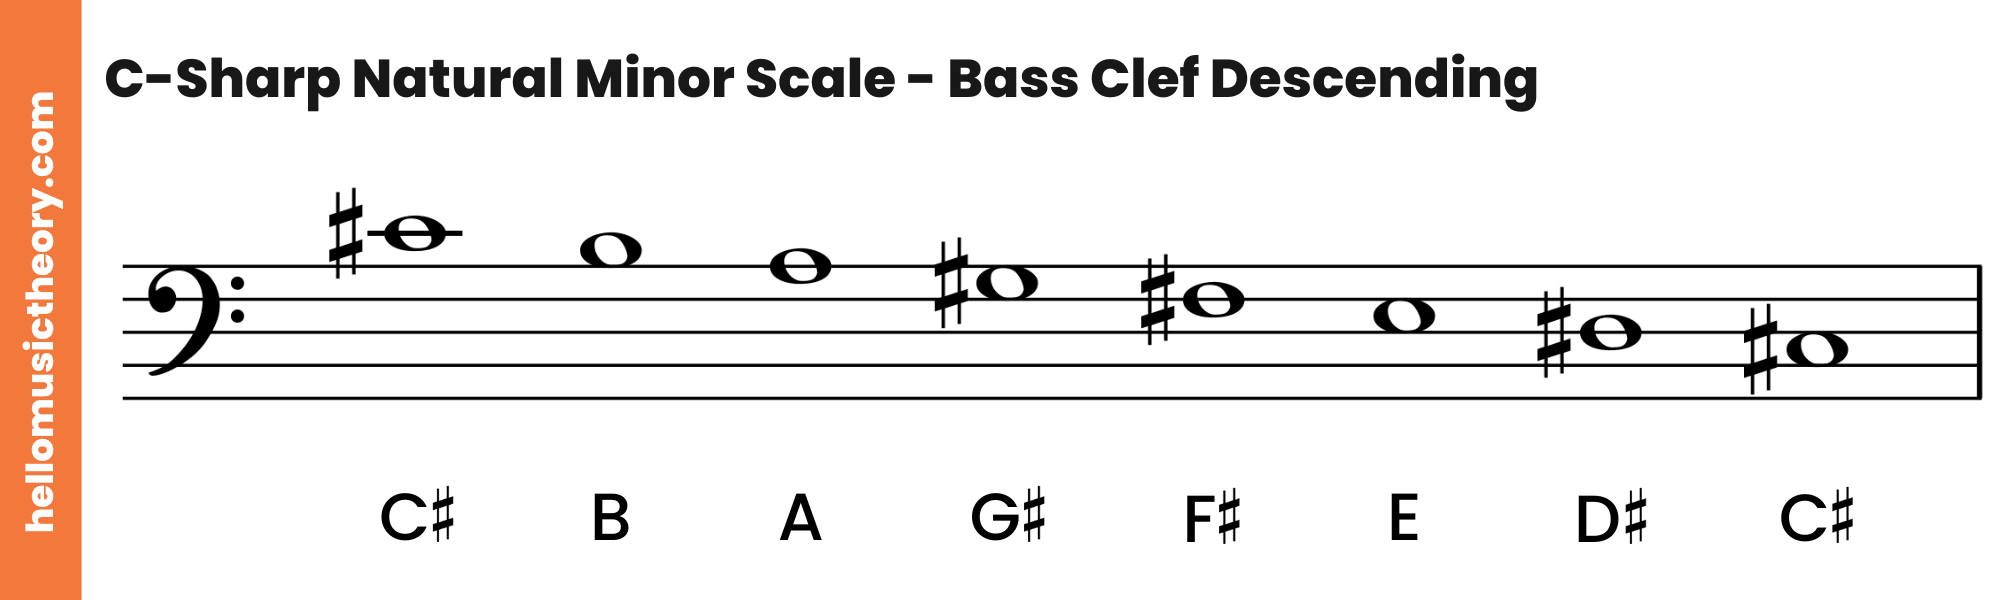 C-Sharp Natural Minor Scale Bass Clef Descending